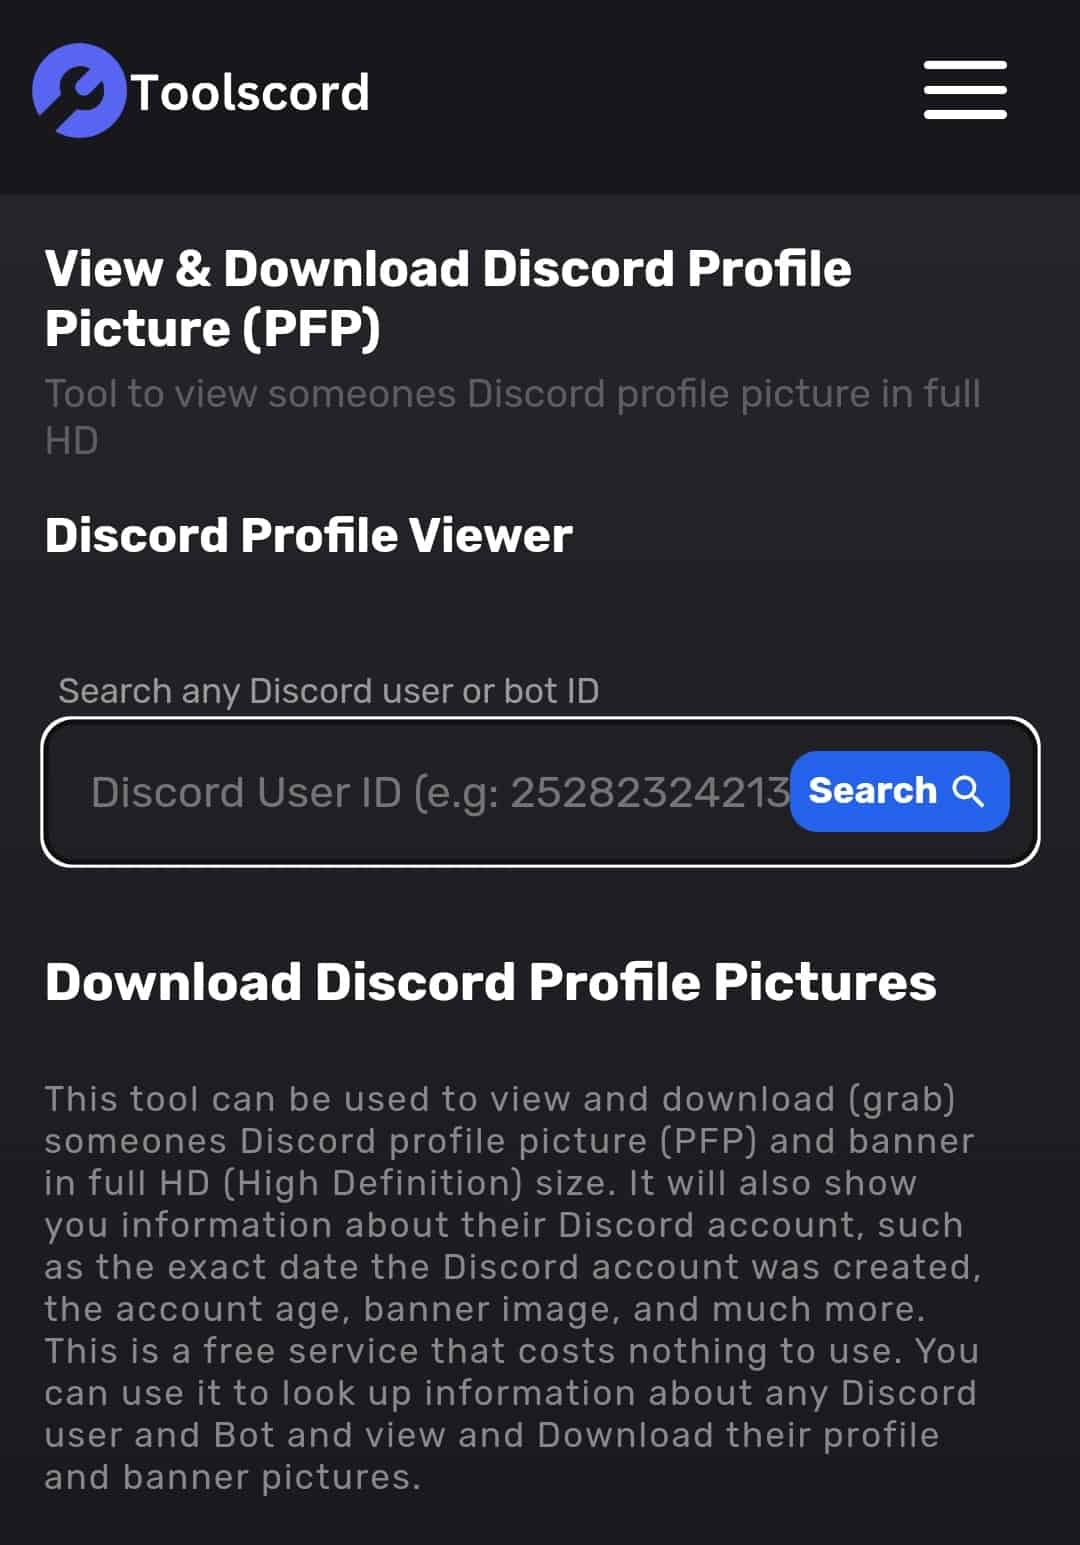 Open Your Browser And Access The Discord Profile Viewer Page